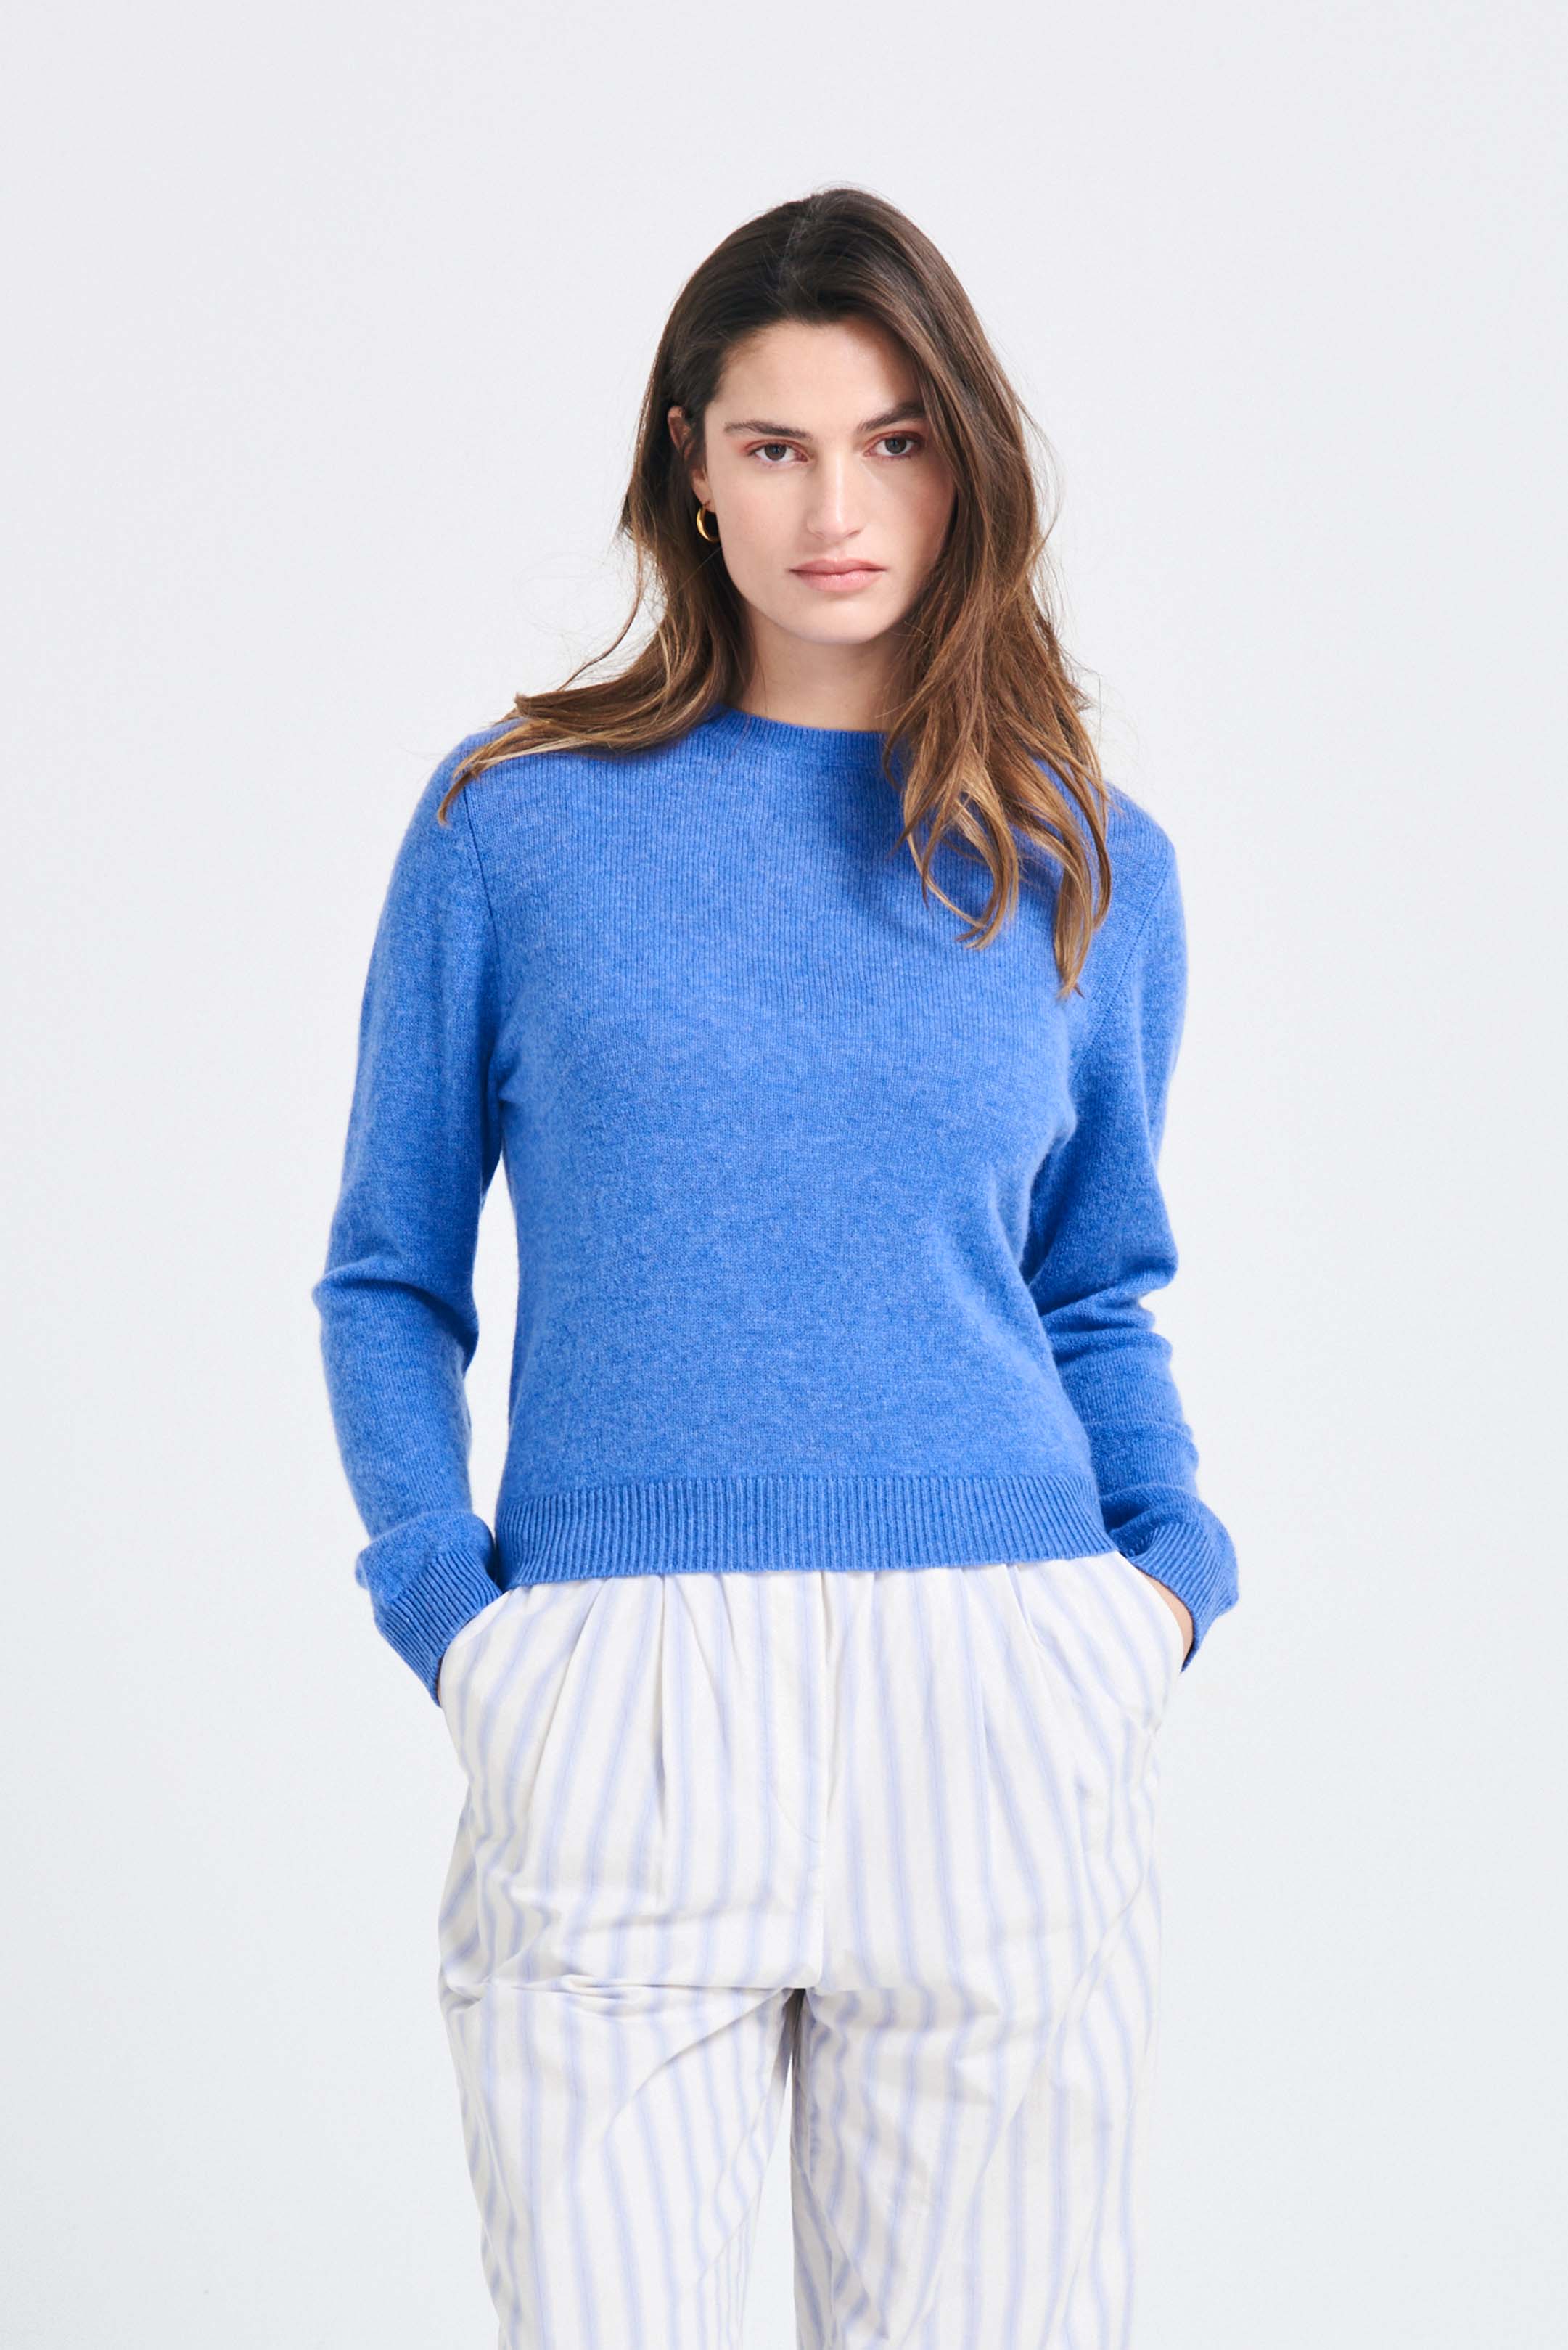 Brown haired female model wearing Jumper1234 Periwinkle blue lighter weight crew neck cashmere jumper